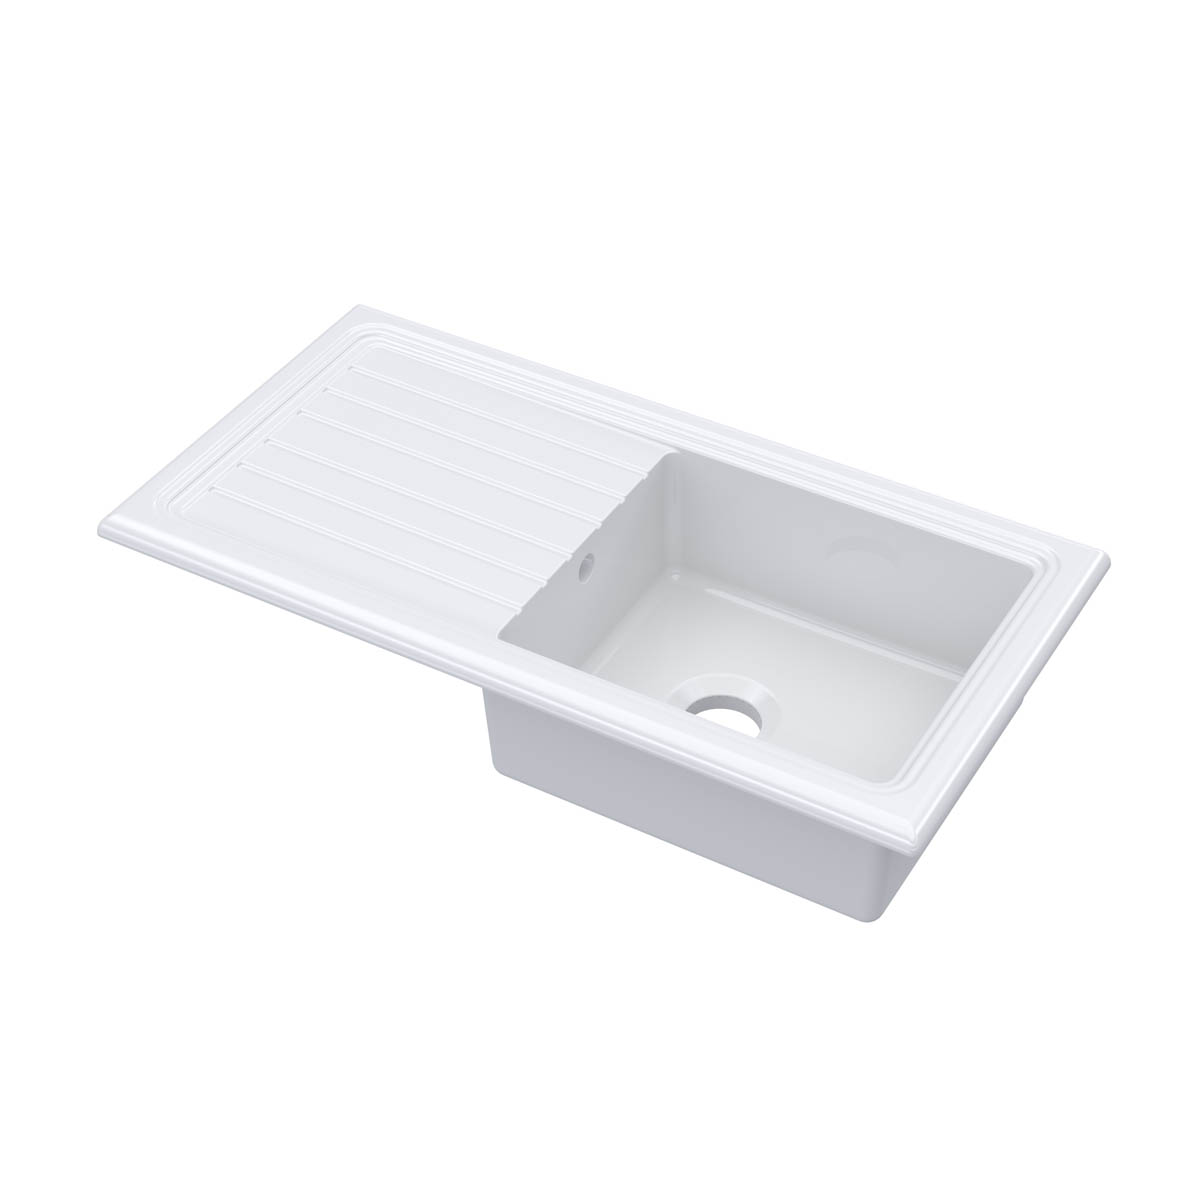 Nuie 1010x525mm 1 Bowl Inset Sink - White (20306)